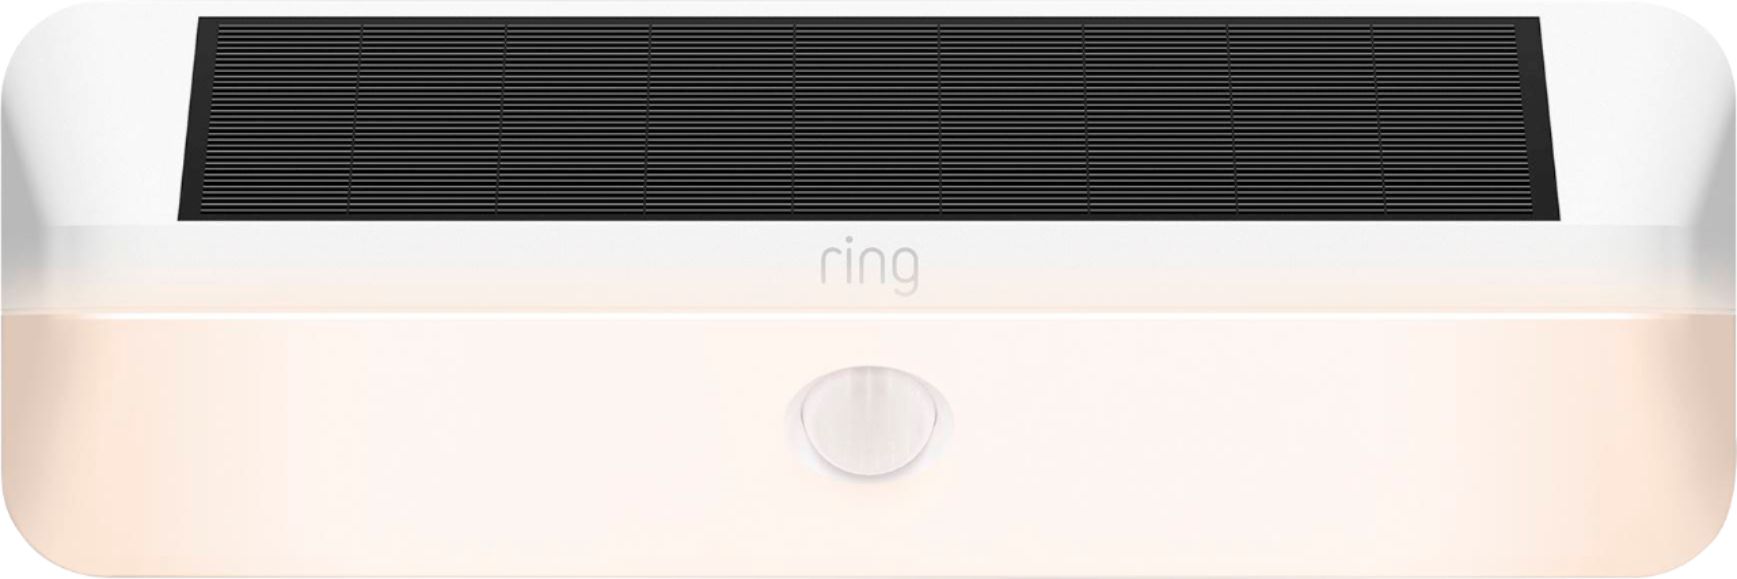 Ring Wall Light Solar Review: Sunshine Whenever You Need It